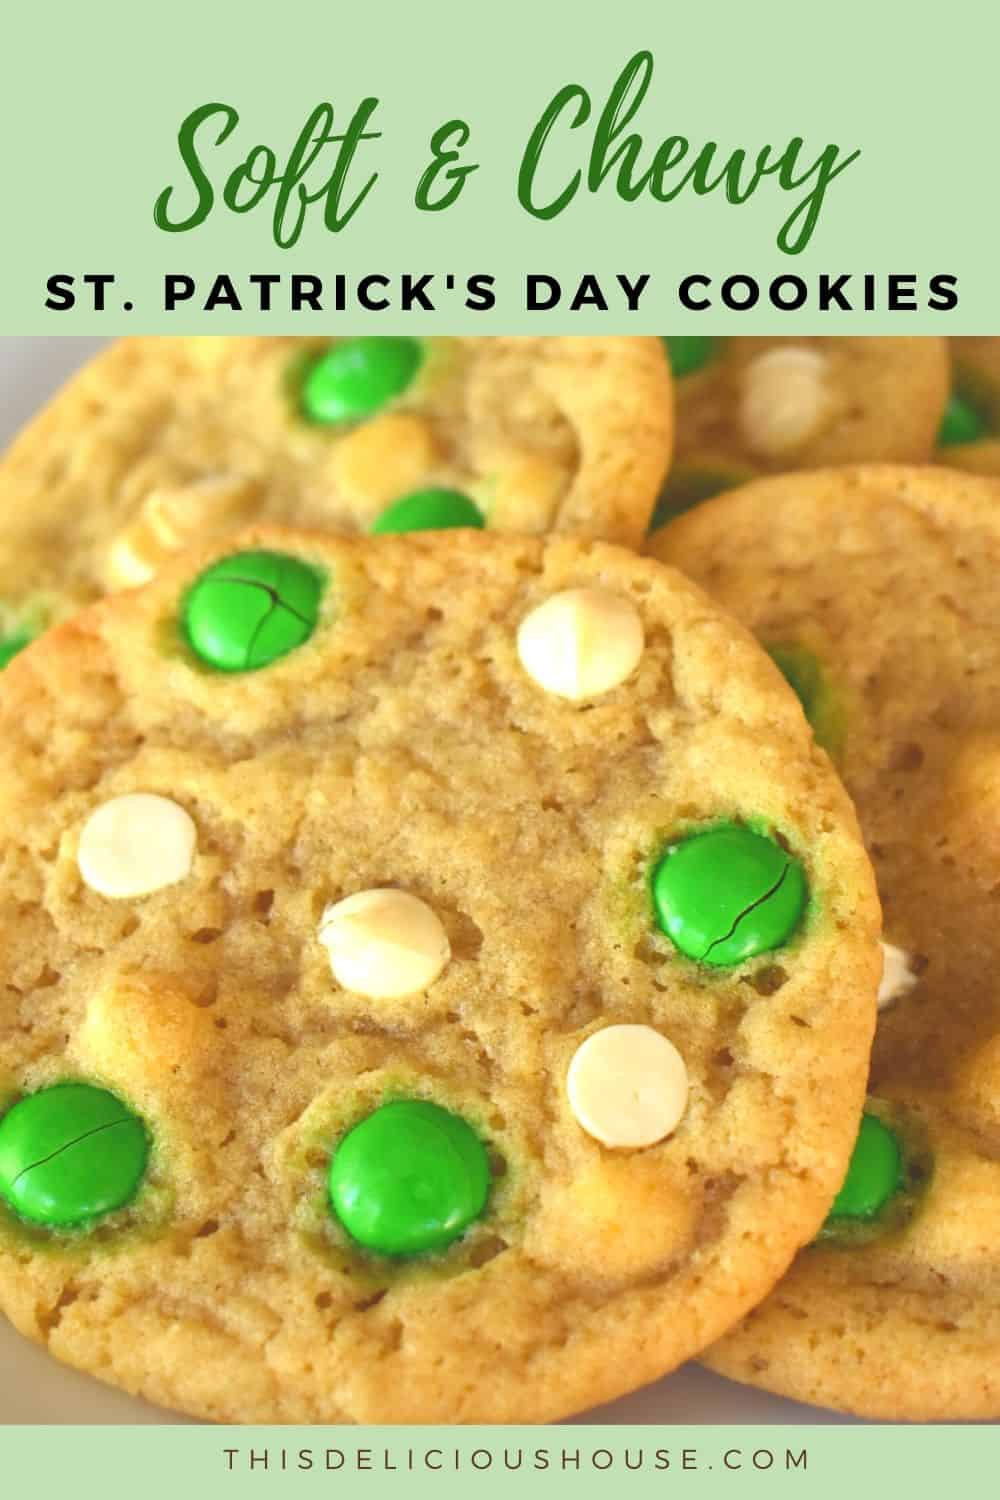 St Patrick's Day Cookies.